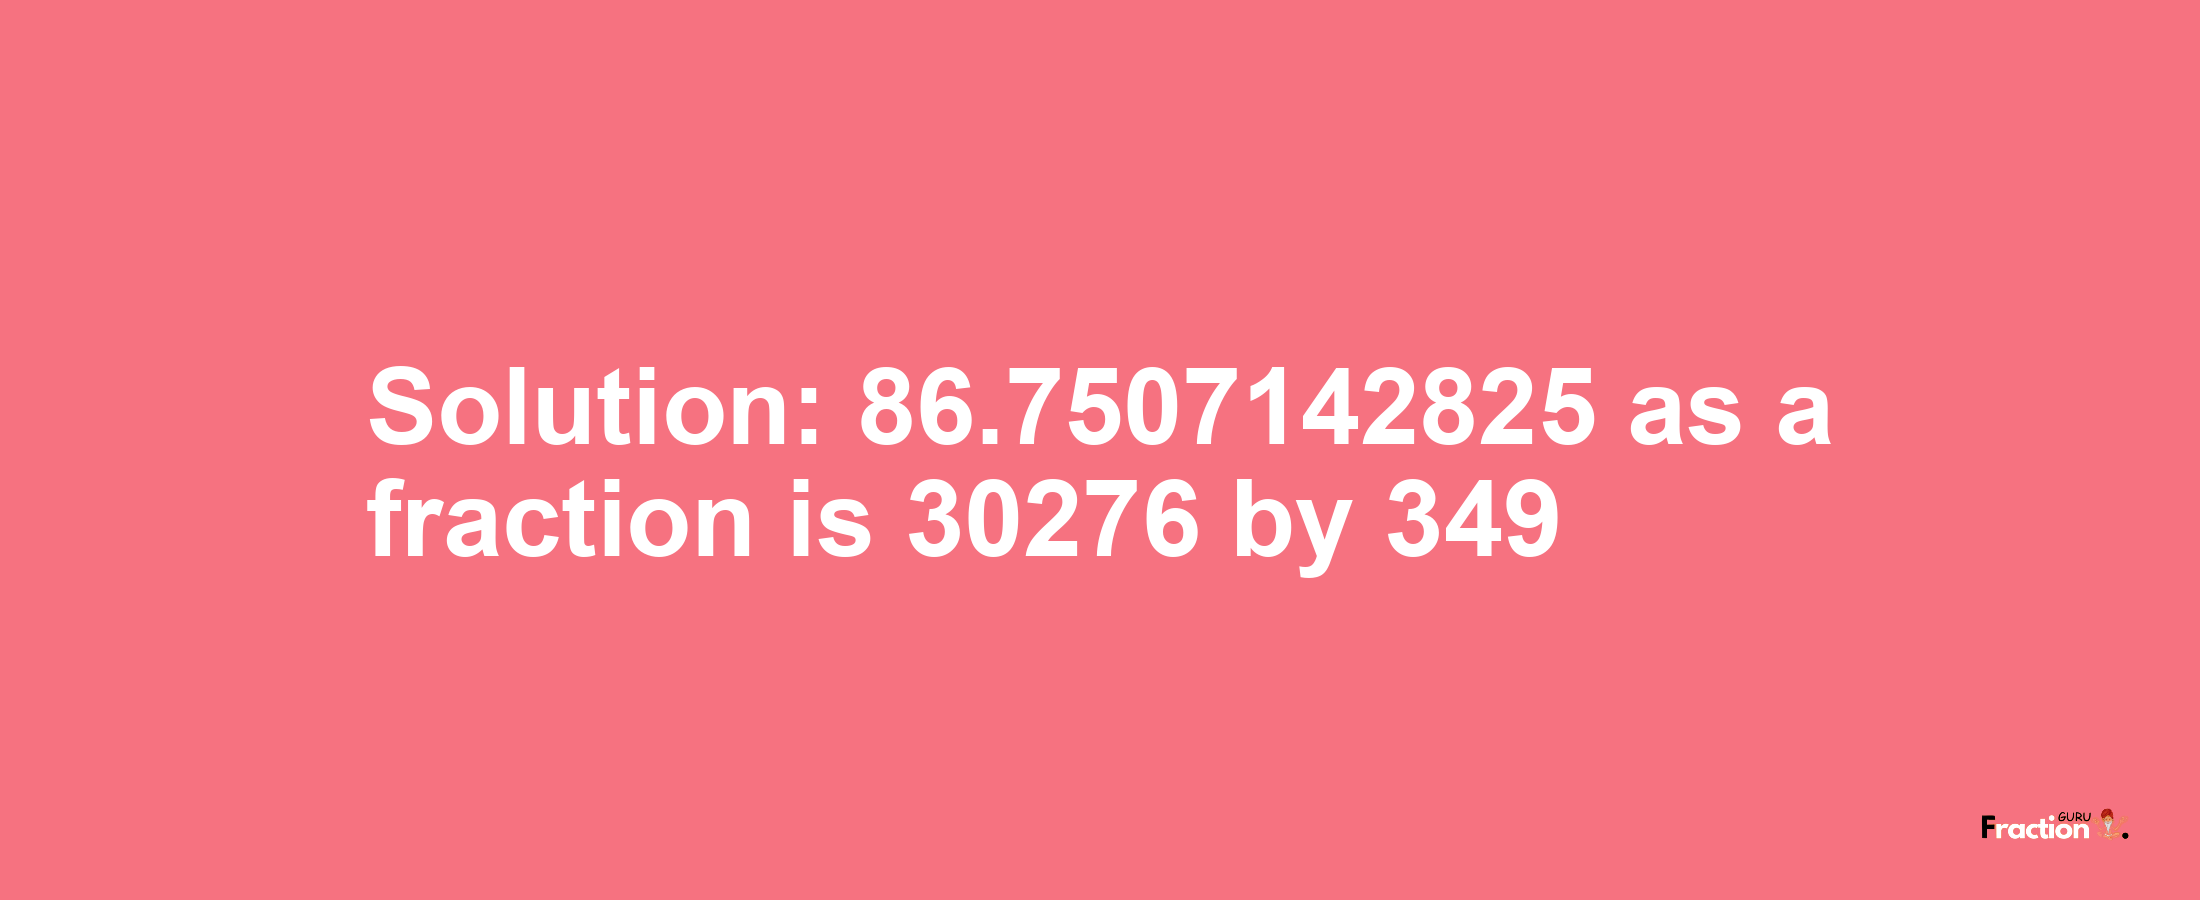 Solution:86.7507142825 as a fraction is 30276/349